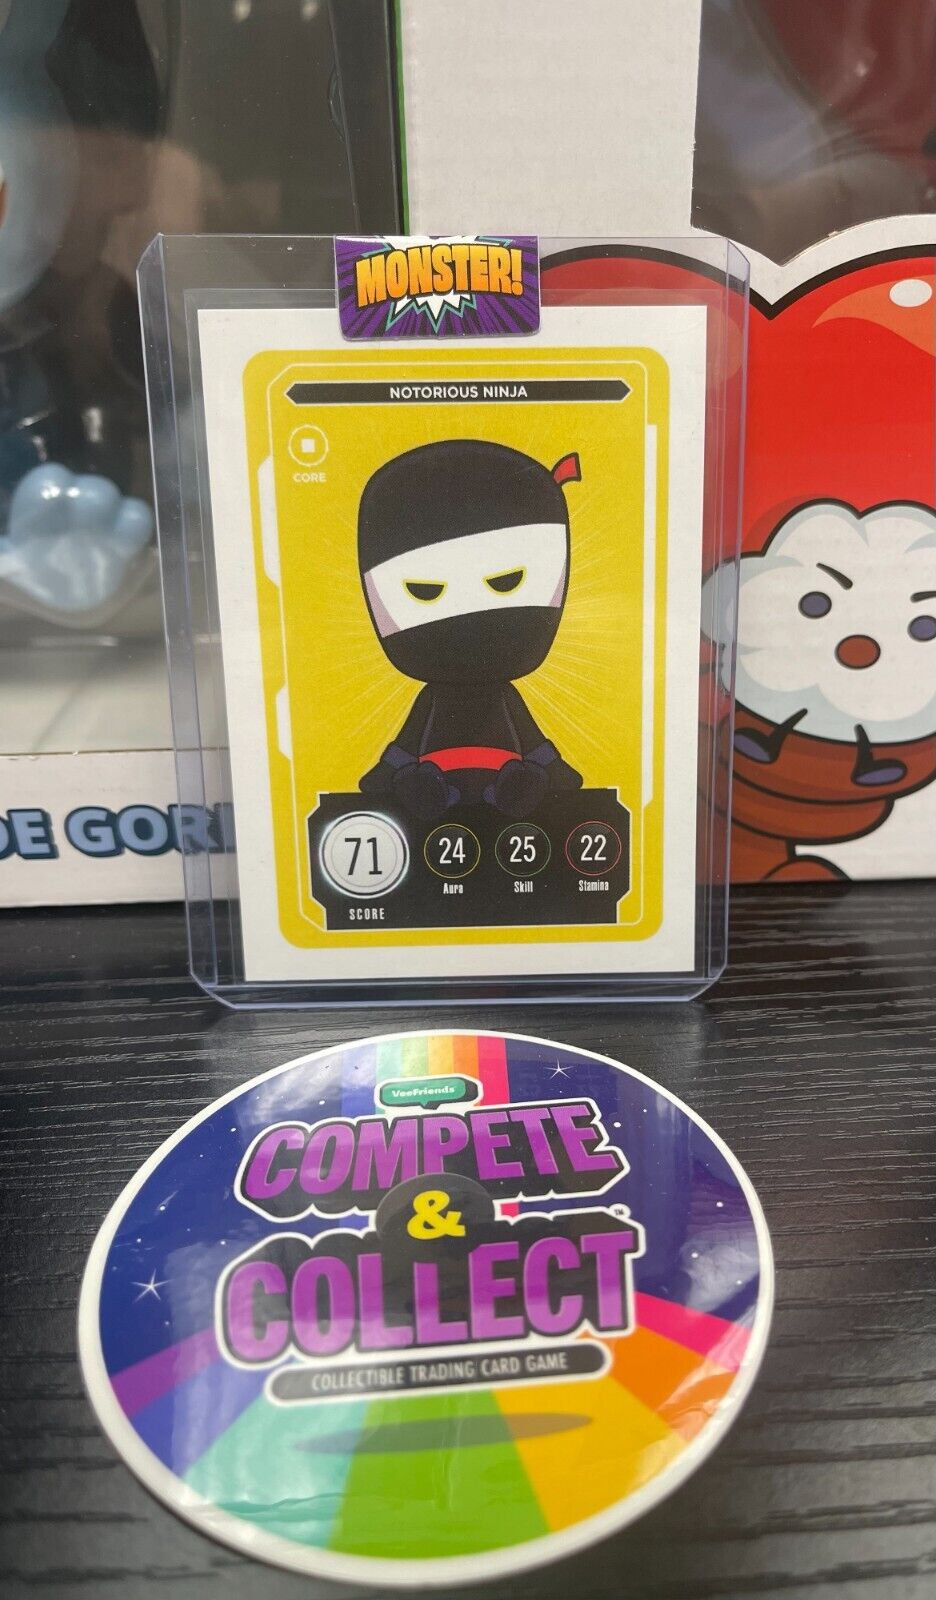 VeeFriends Series 2 CORE Notorious Ninja Score 71 Compete and Collect